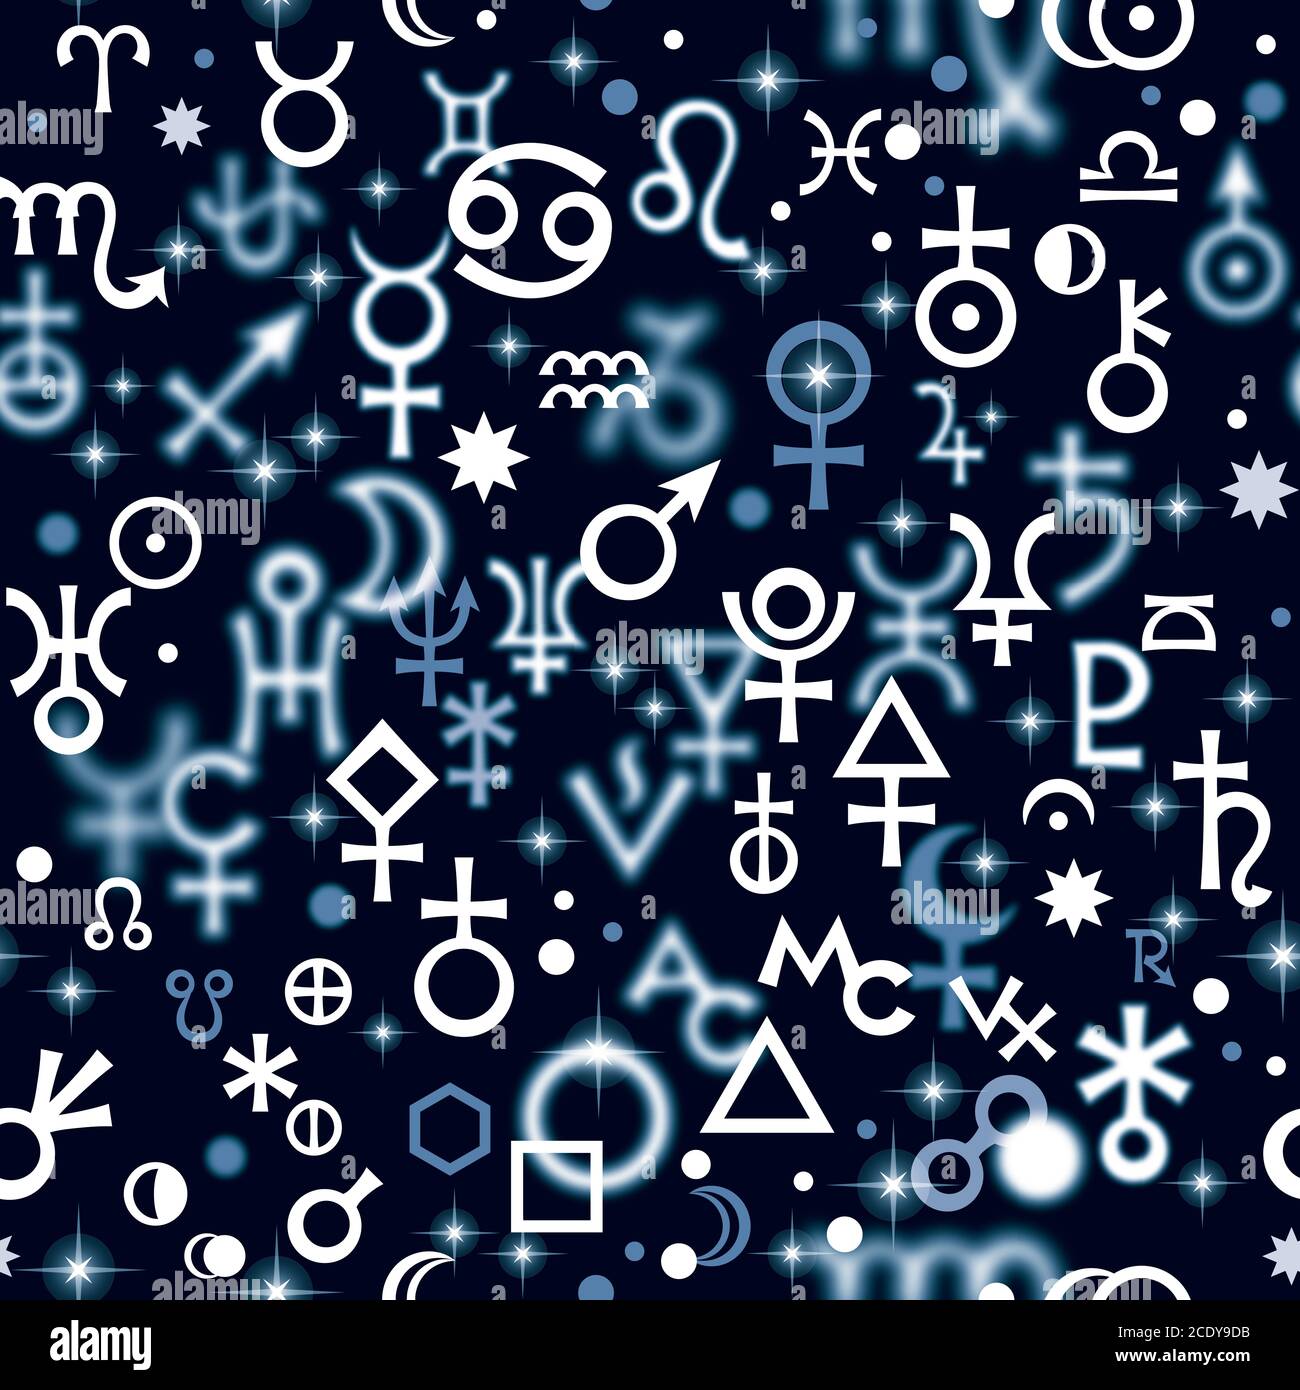 Astrological hieroglyphic signs, Mystic kabbalistic symbols. Deep Night background, Chaotic seamless pattern. Stock Photo